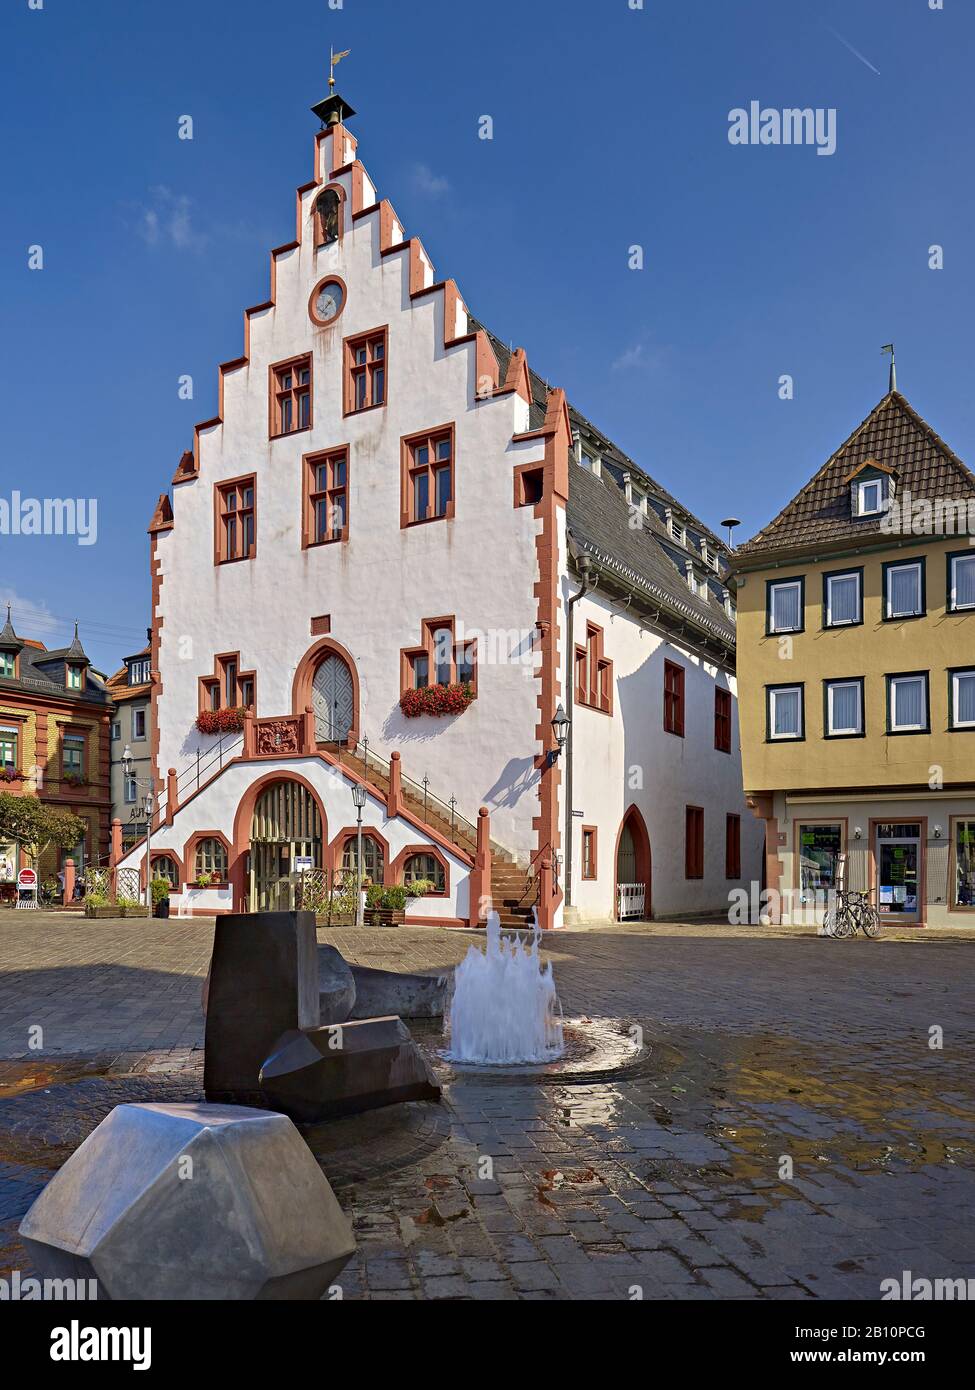 Old city hall at the market in Karlstadt, Main-Spessart, Lower Franconia, Germany Stock Photo